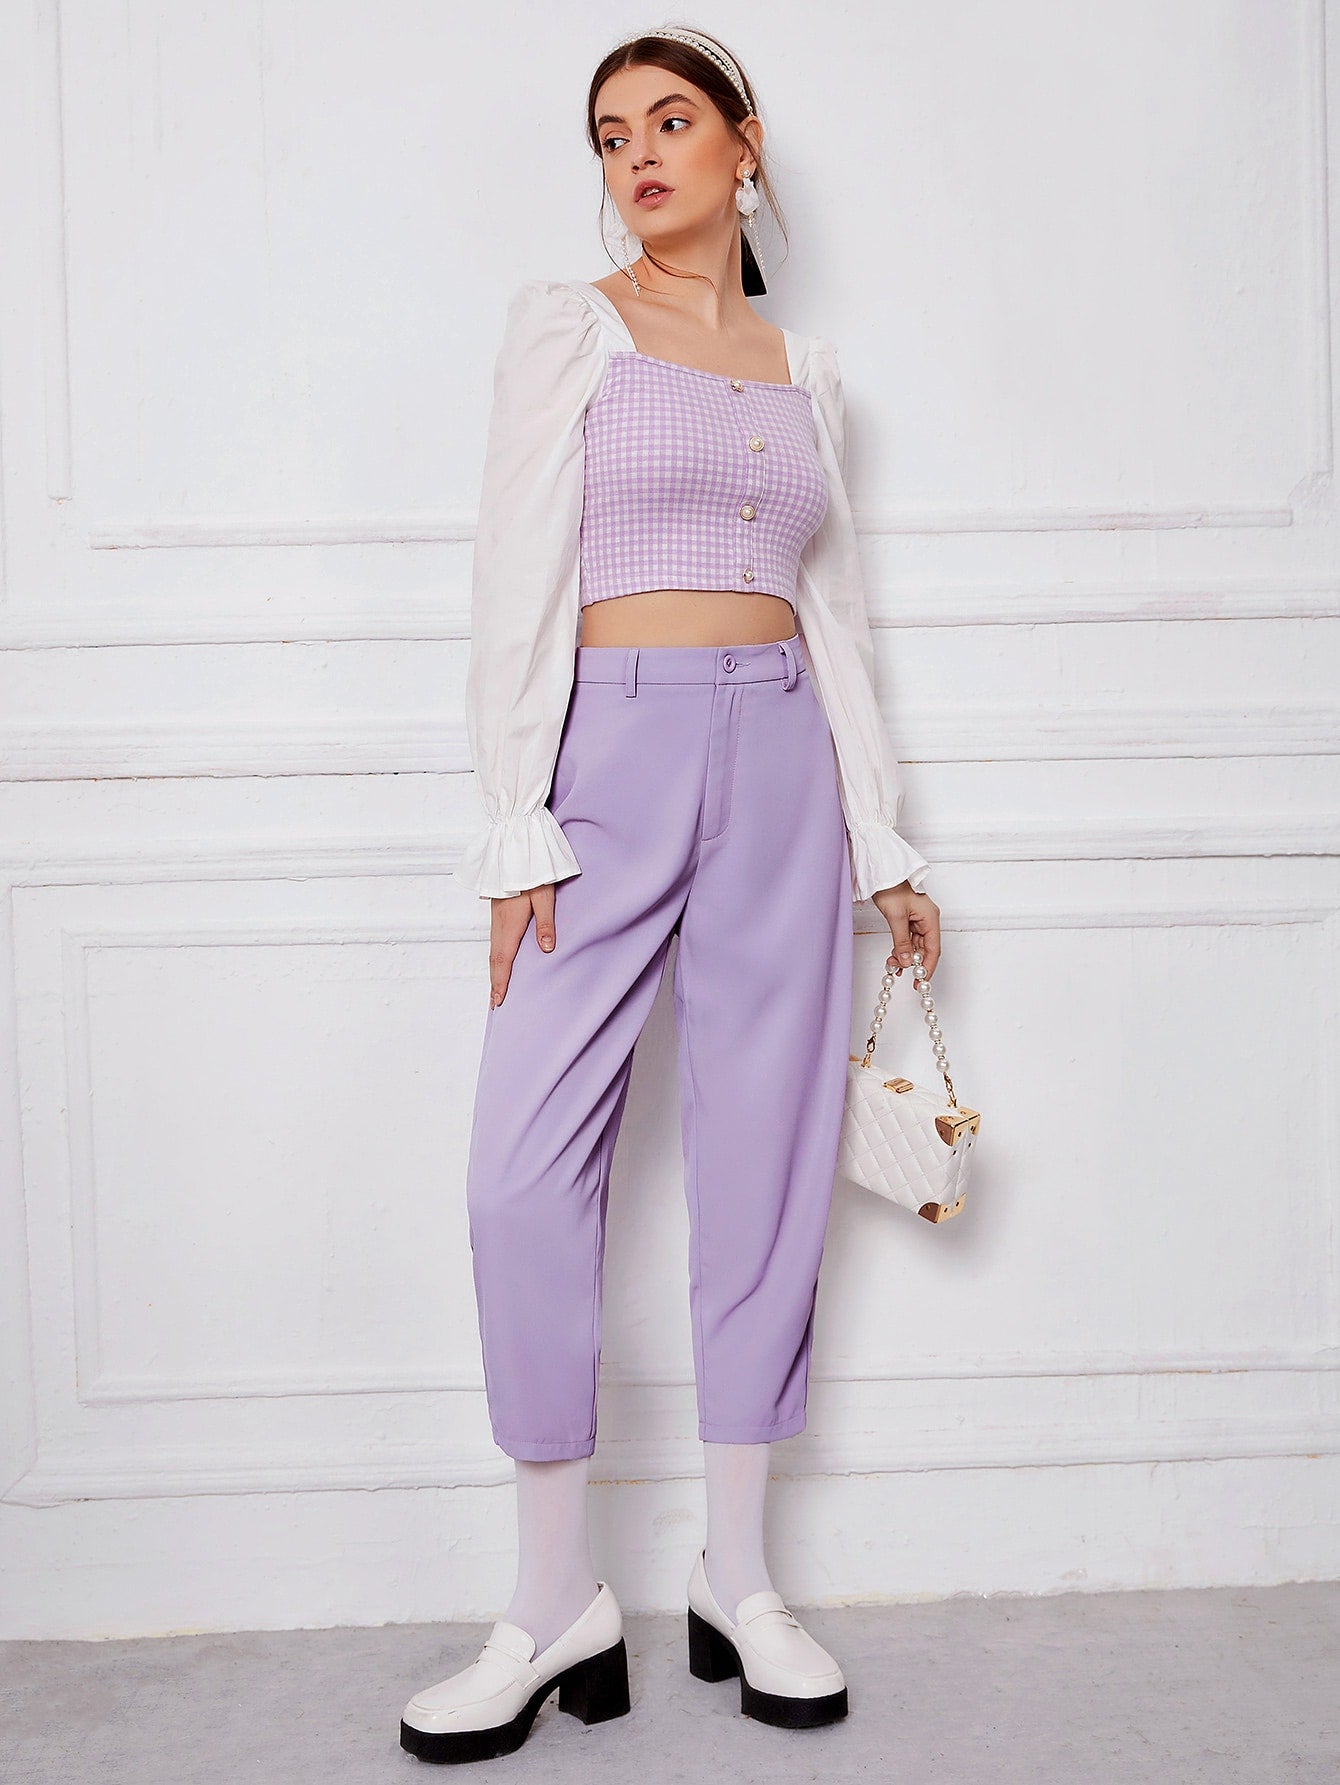 High Waist Solid Tailored Pants